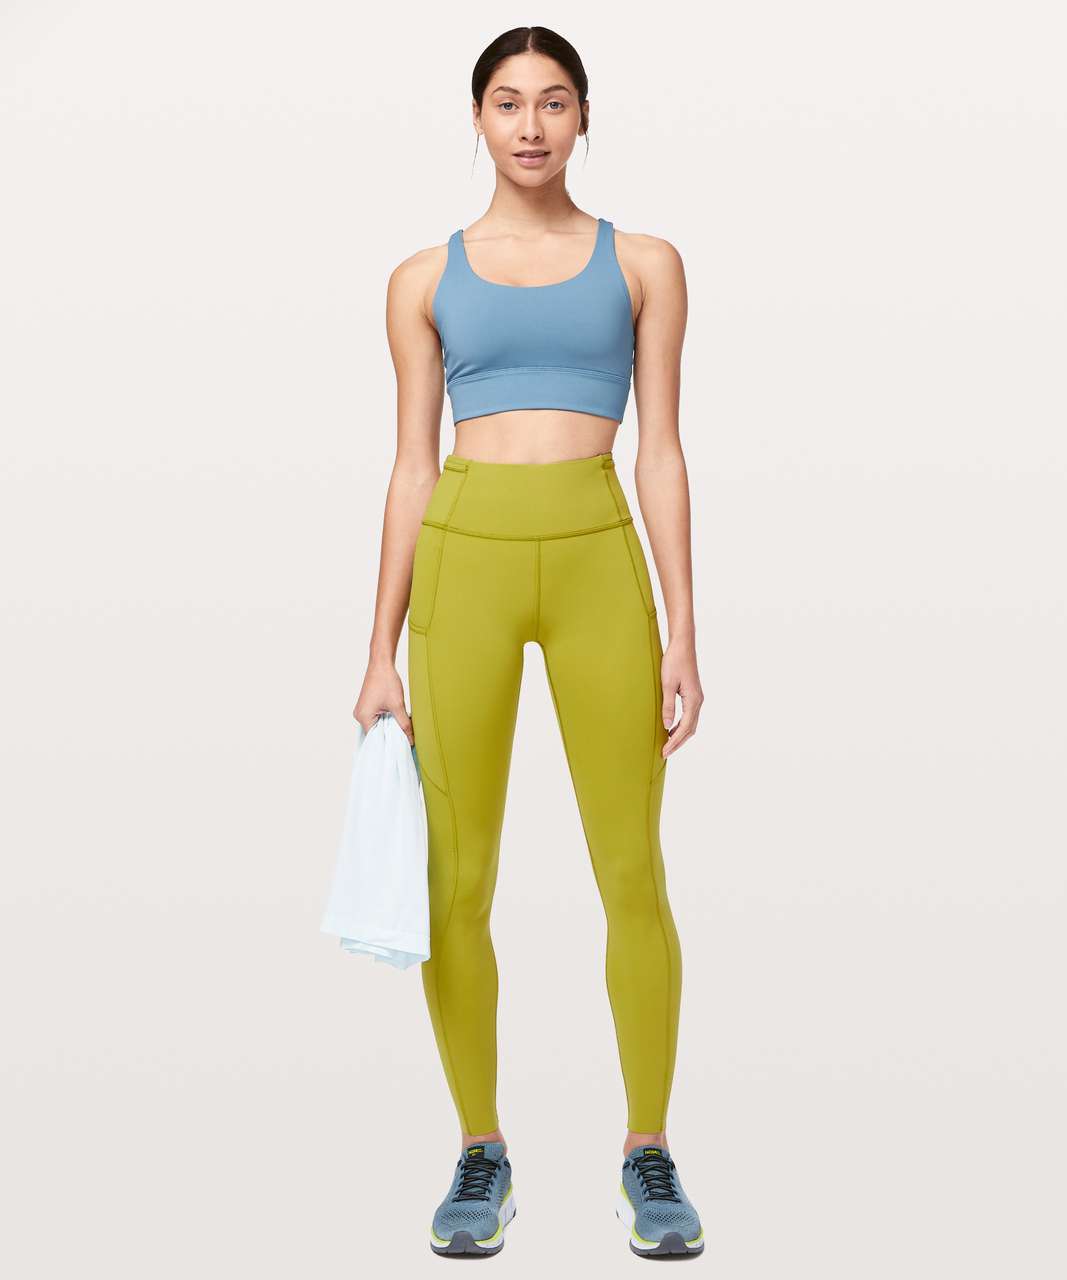 Lululemon Fast and Free Tight 28" *Non-Reflective - Golden Lime